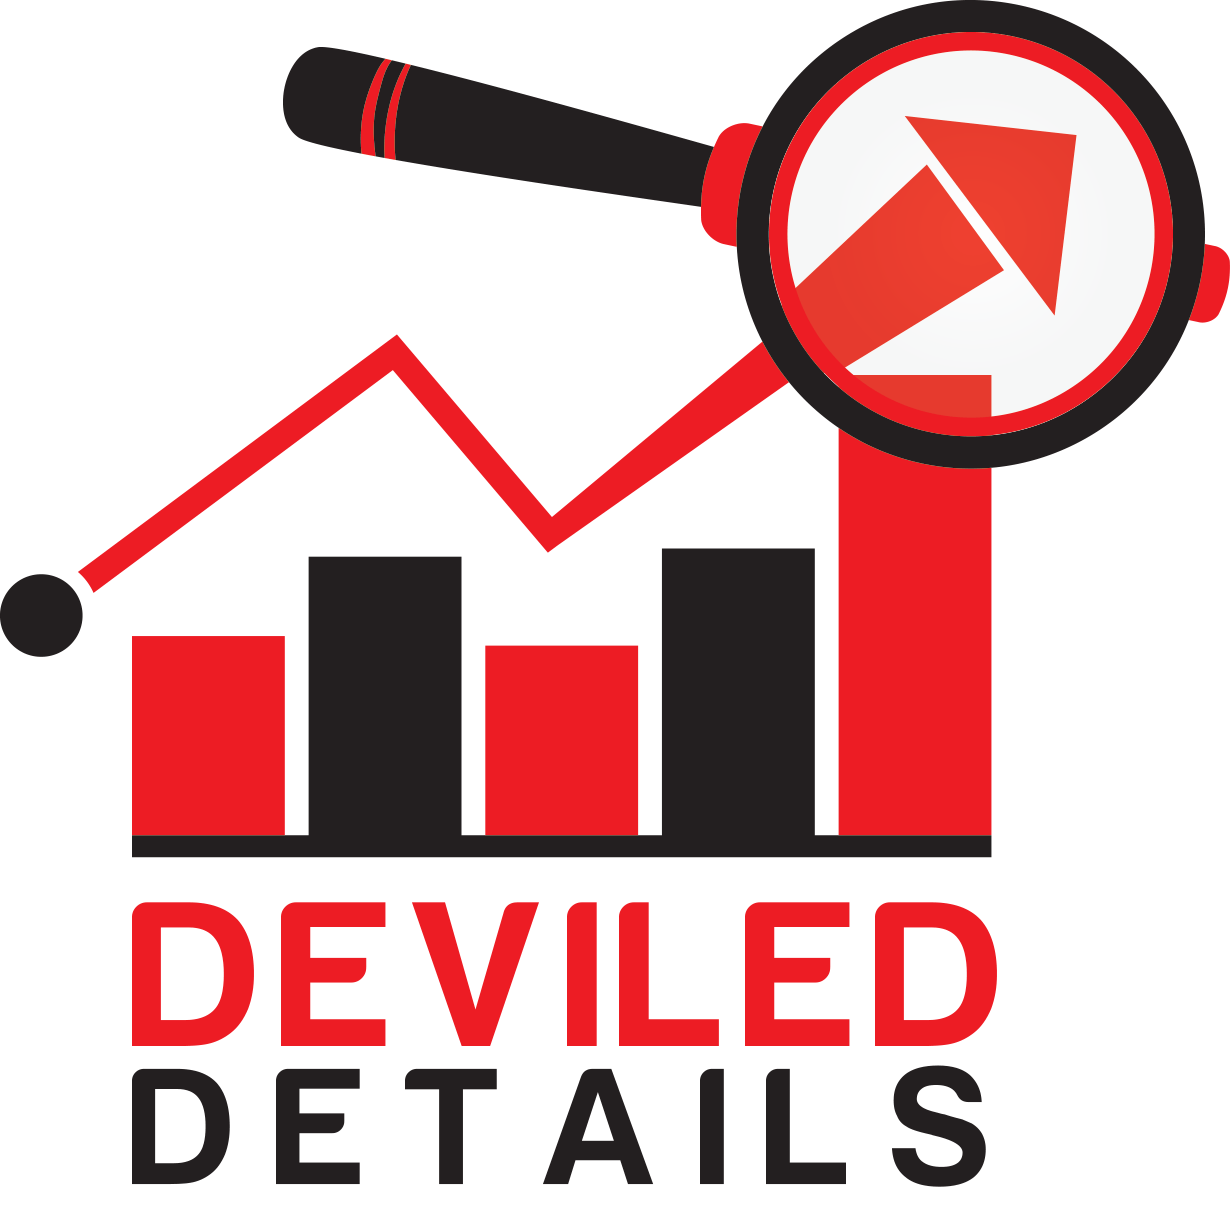 Deviled Details - What You Need Before A Business Plan